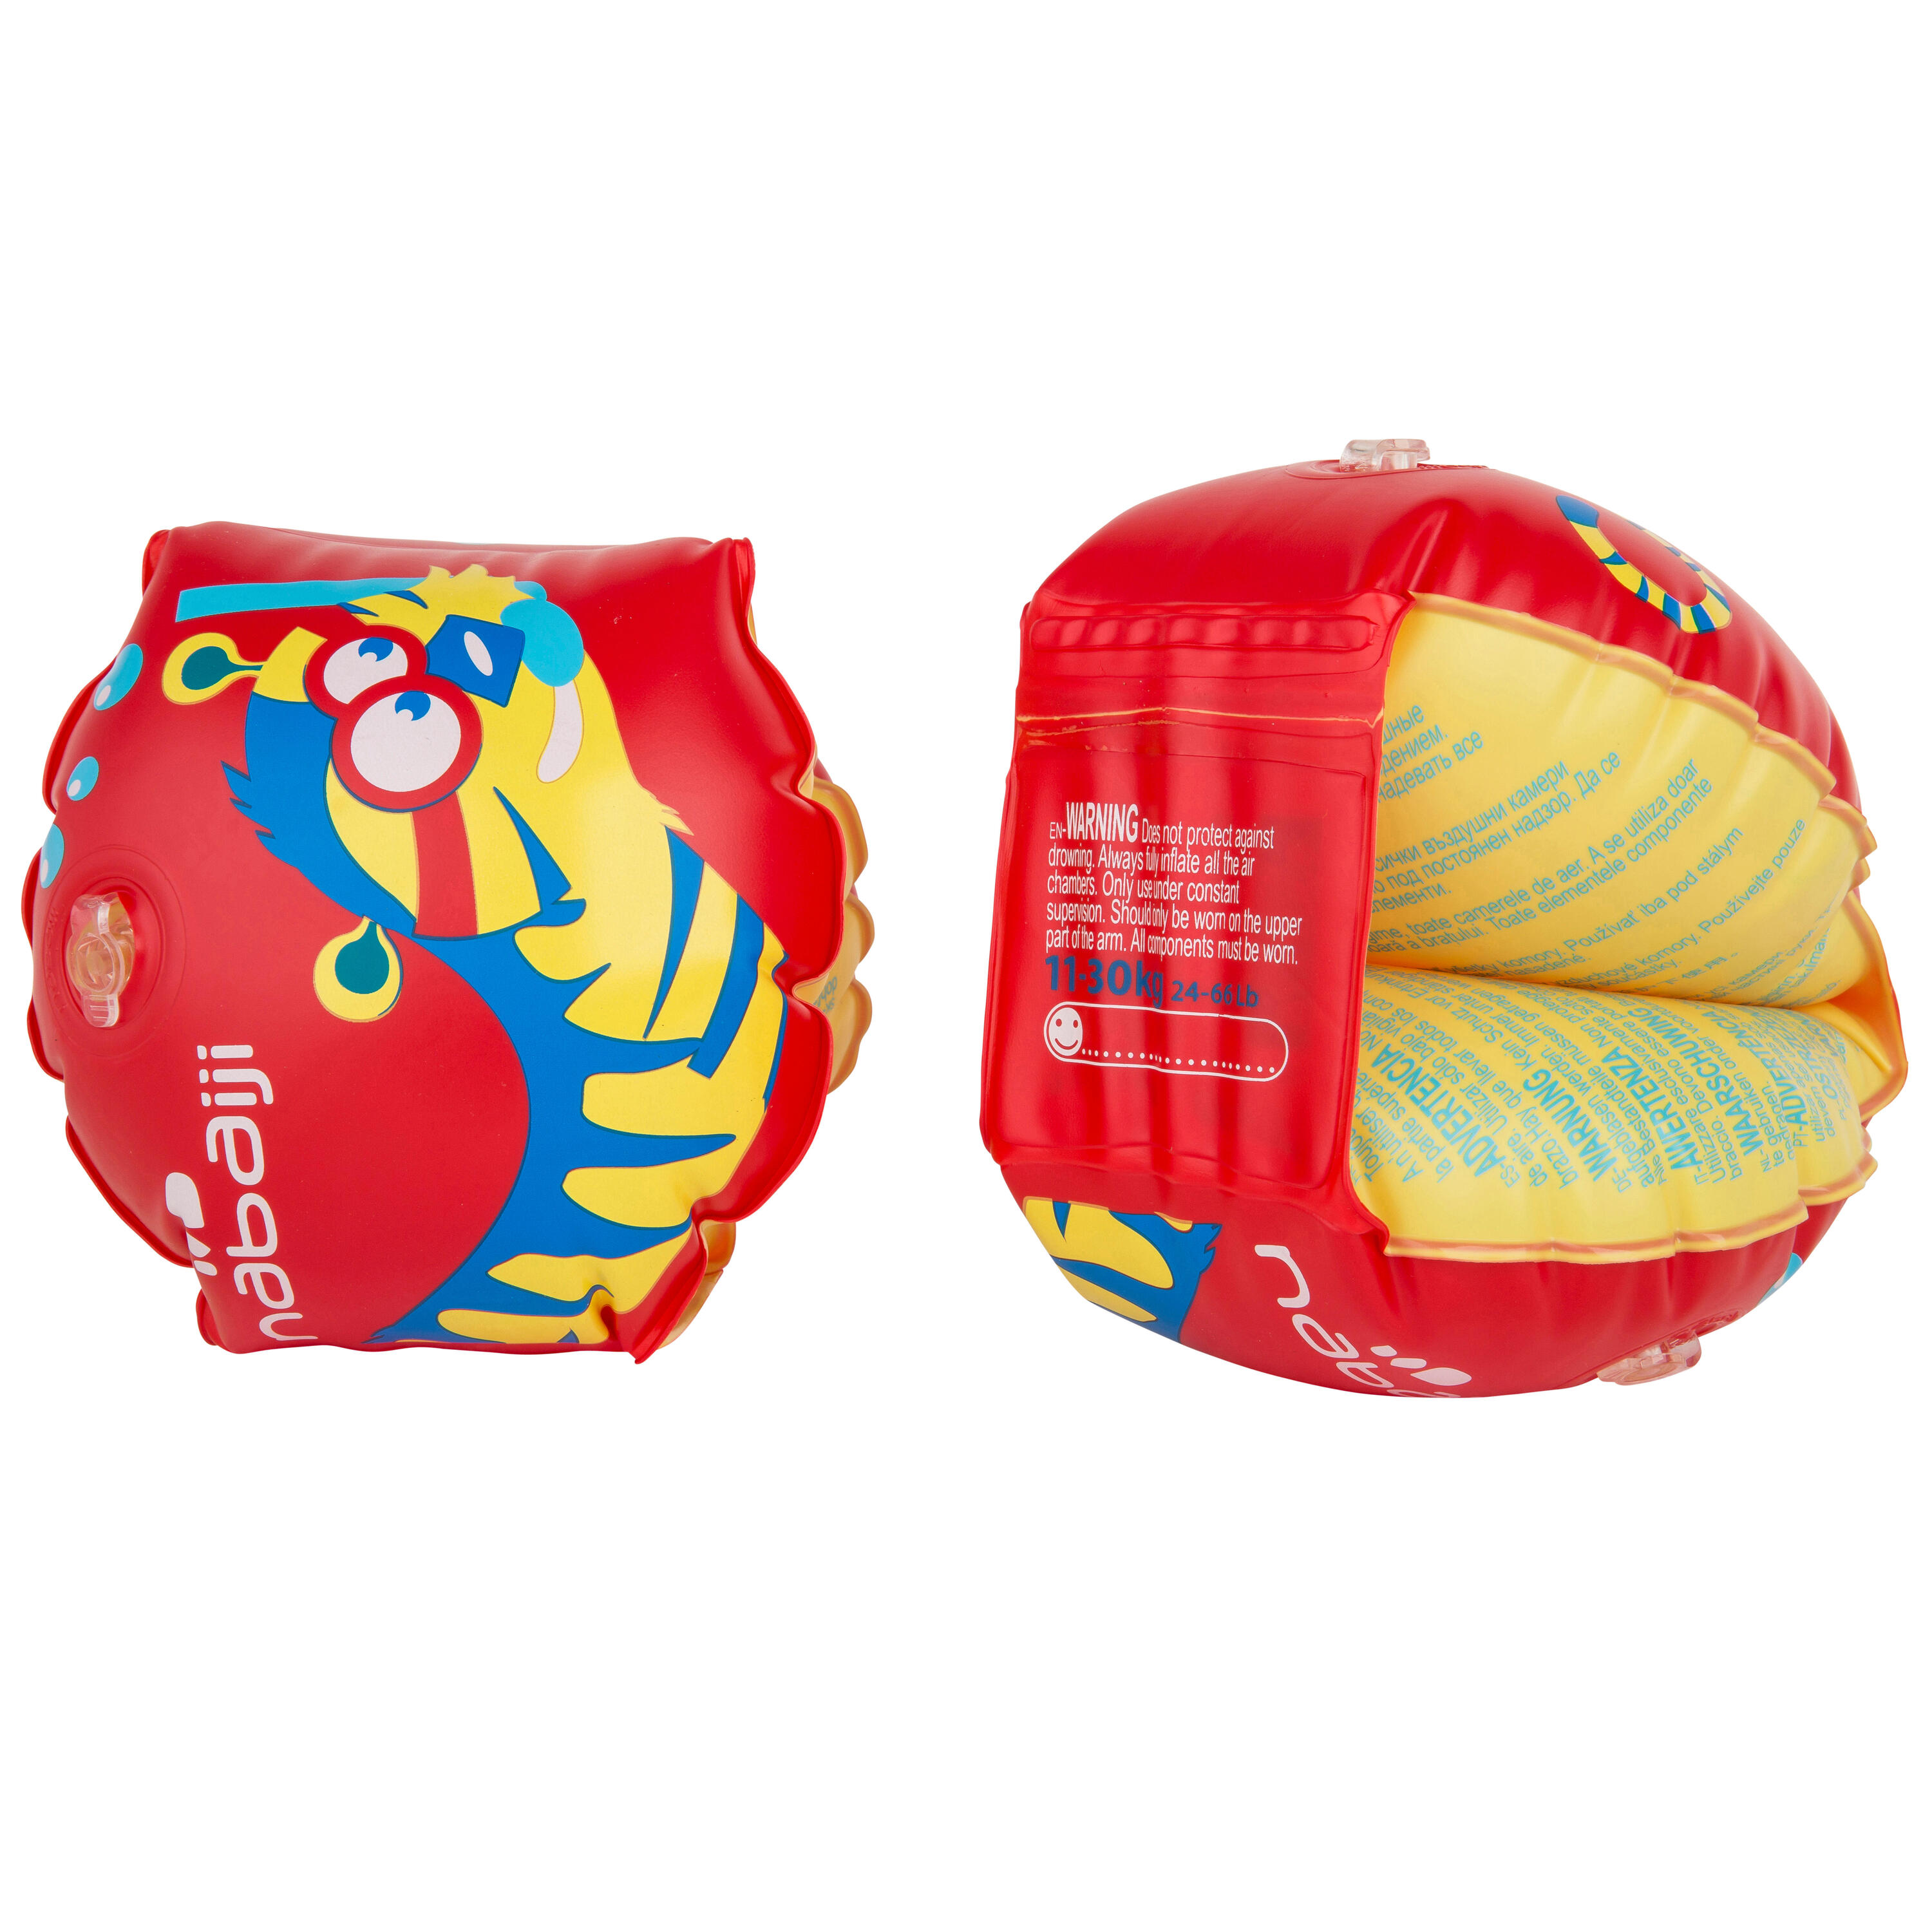 NABAIJI Armbands with Two Inflation Chambers 11-30 kg - "Tiger" Print Red